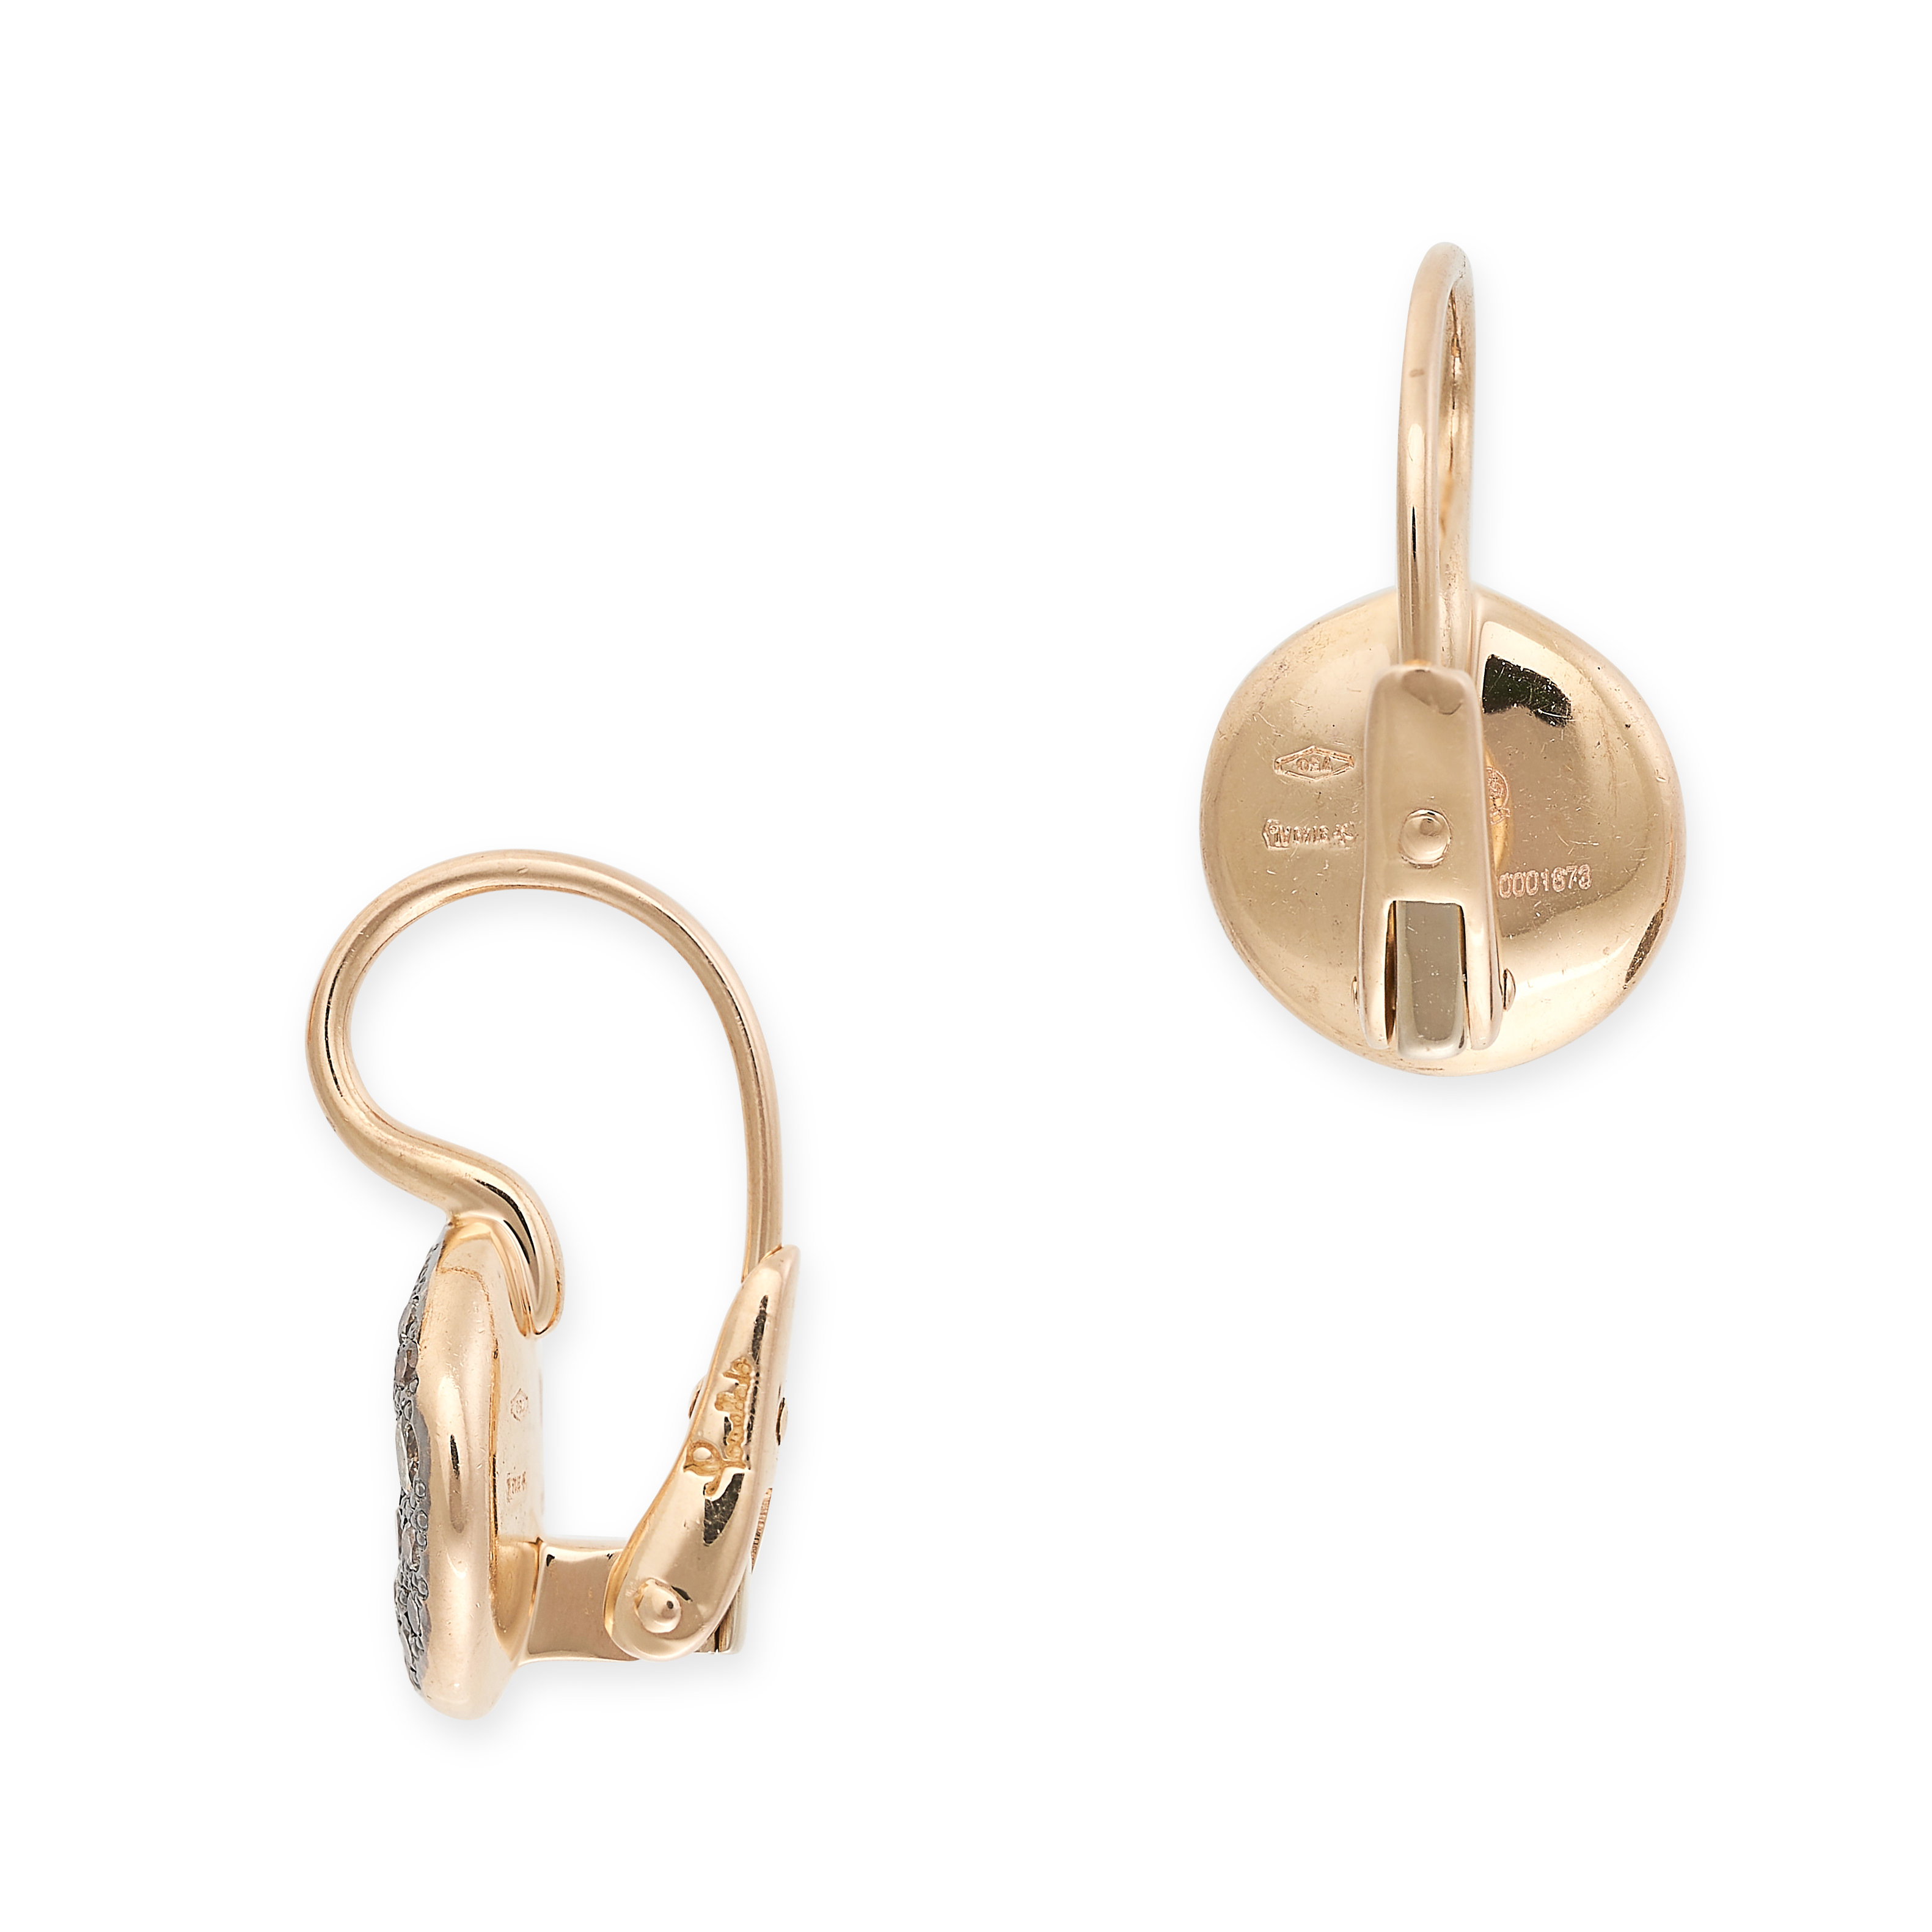 POMELLATO, A PAIR OF DIAMOND SABBIA EARRINGS in 18ct rose gold, the circular bodies pave set with - Image 2 of 2